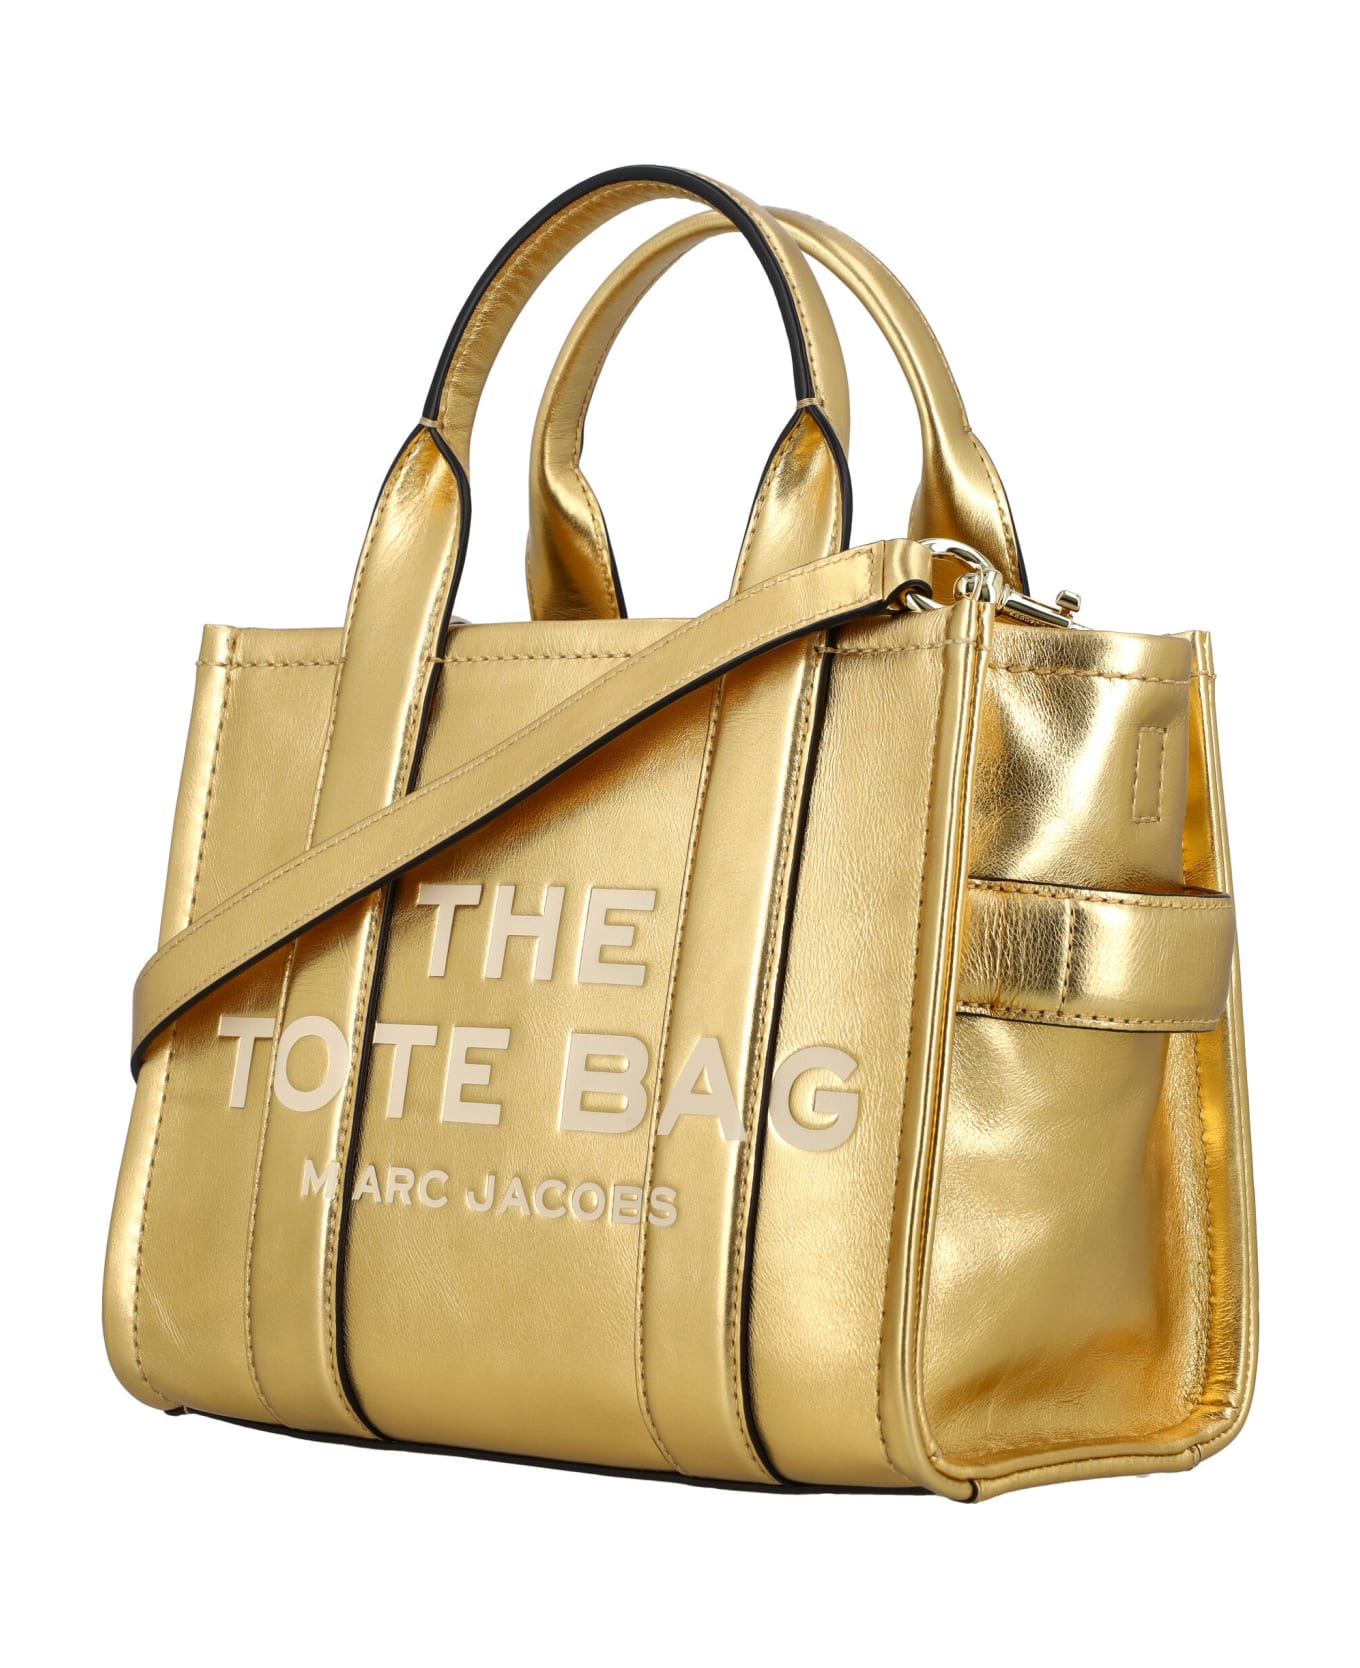 Marc Jacobs The Small Tote Bag Metallic - GOLD トートバッグ